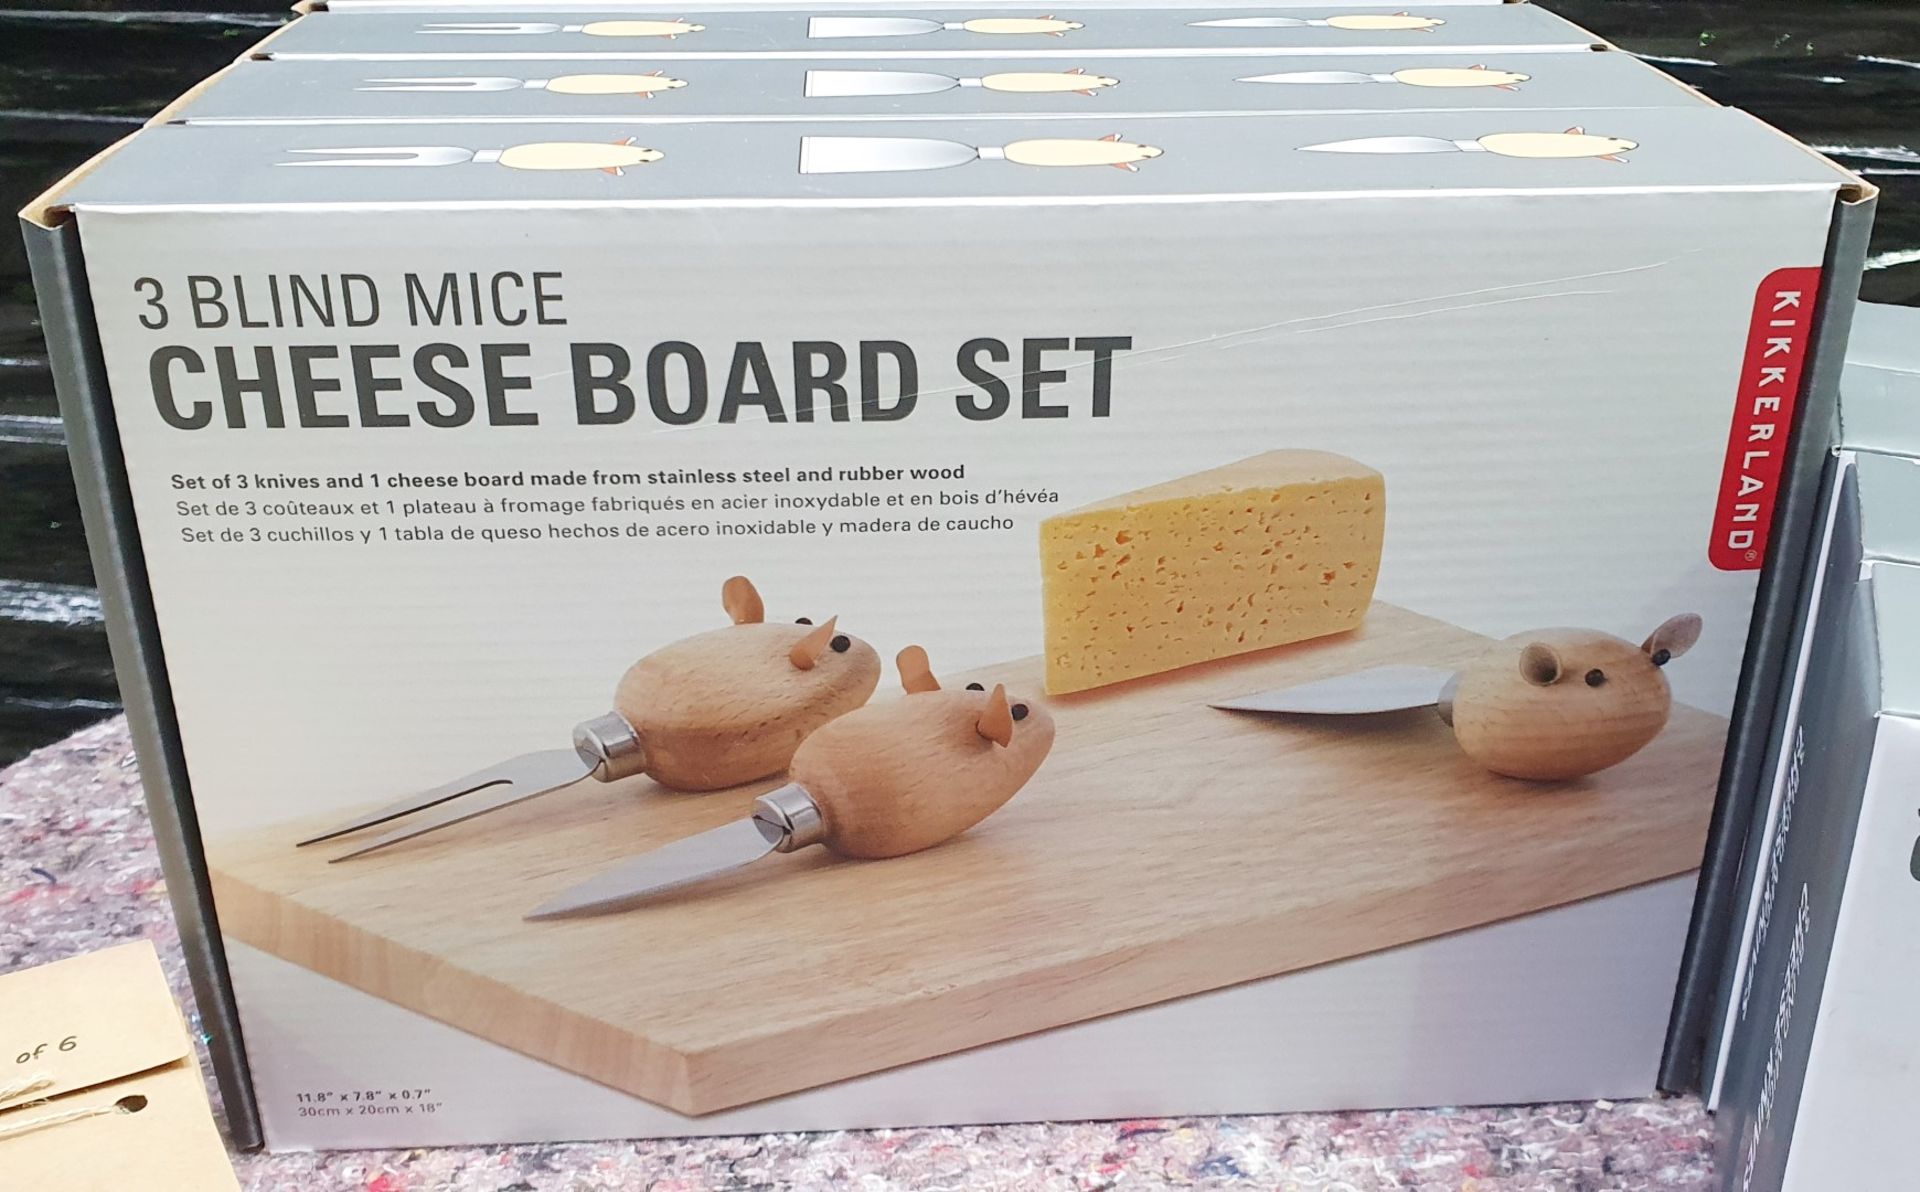 4 x Three Blind Mice Cheese Board and Knife Sets, 4 x Cheese Knife Sets and 4 x Vegan Wax Wraps - - Image 3 of 6